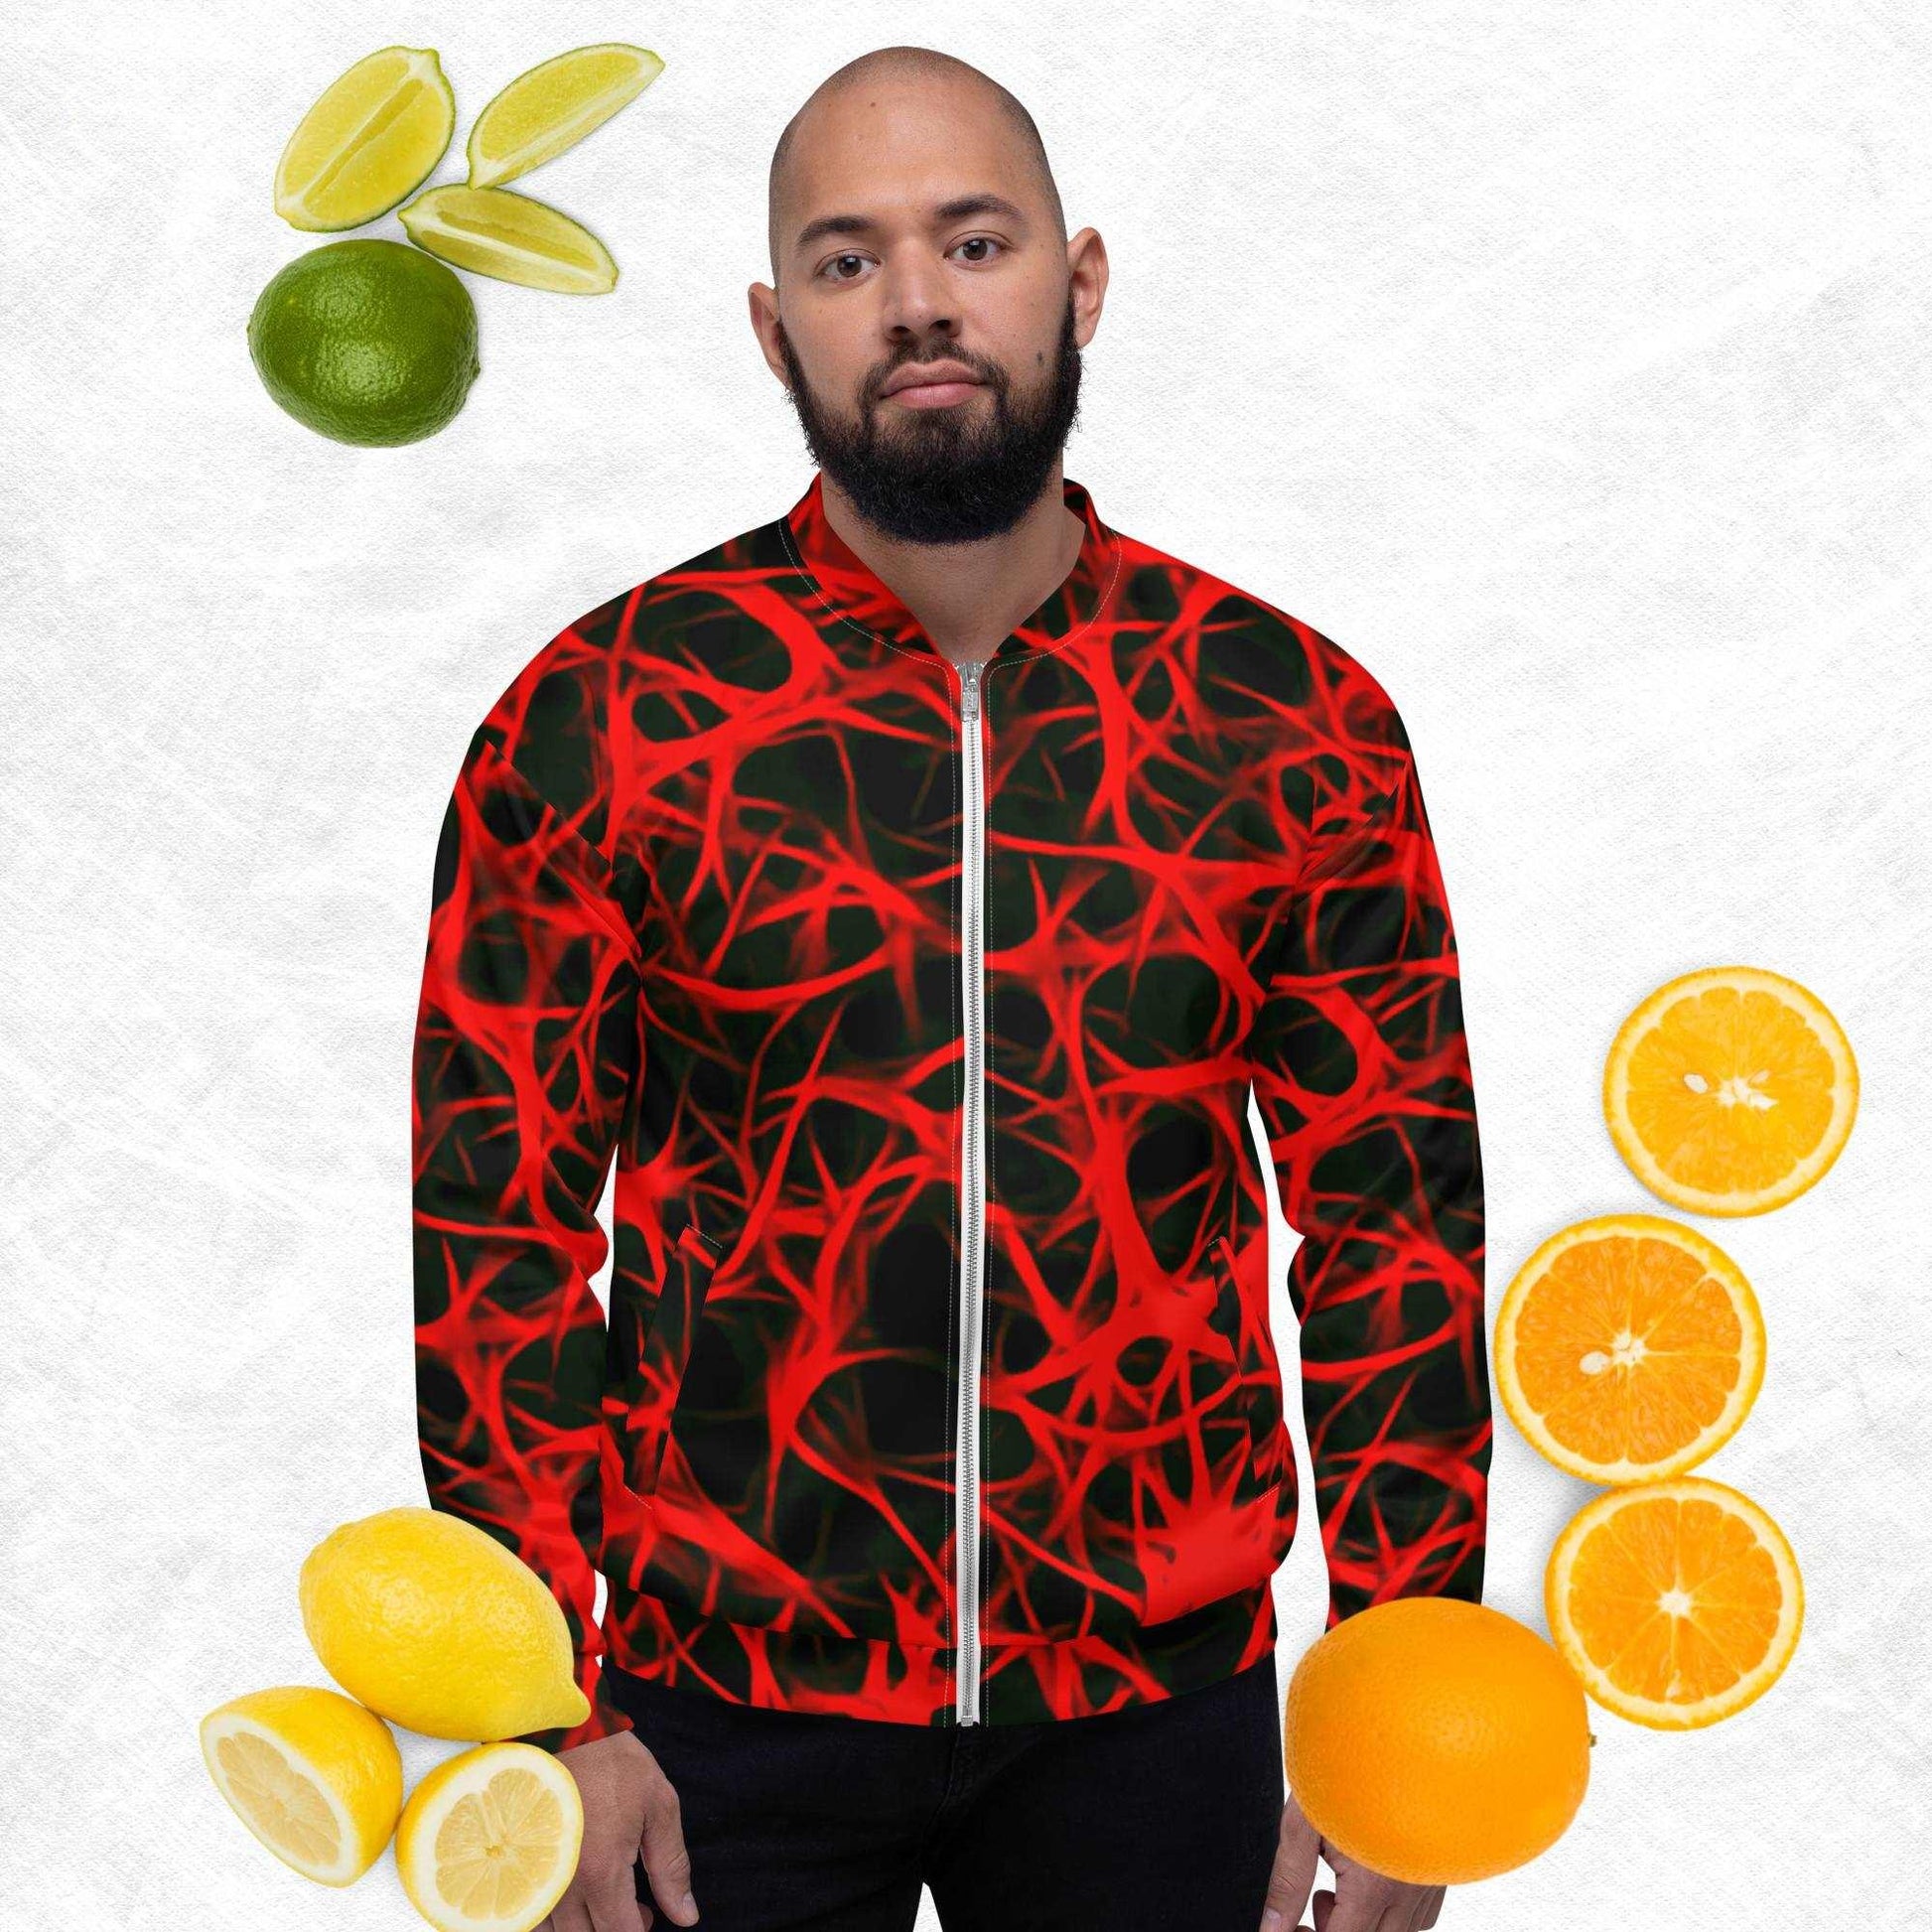 Introducing the Bold Red-Charged Unisex Bomber Jacket - Ignite Your Style with This Must-Have Fashion Statement! - Lizard Vigilante